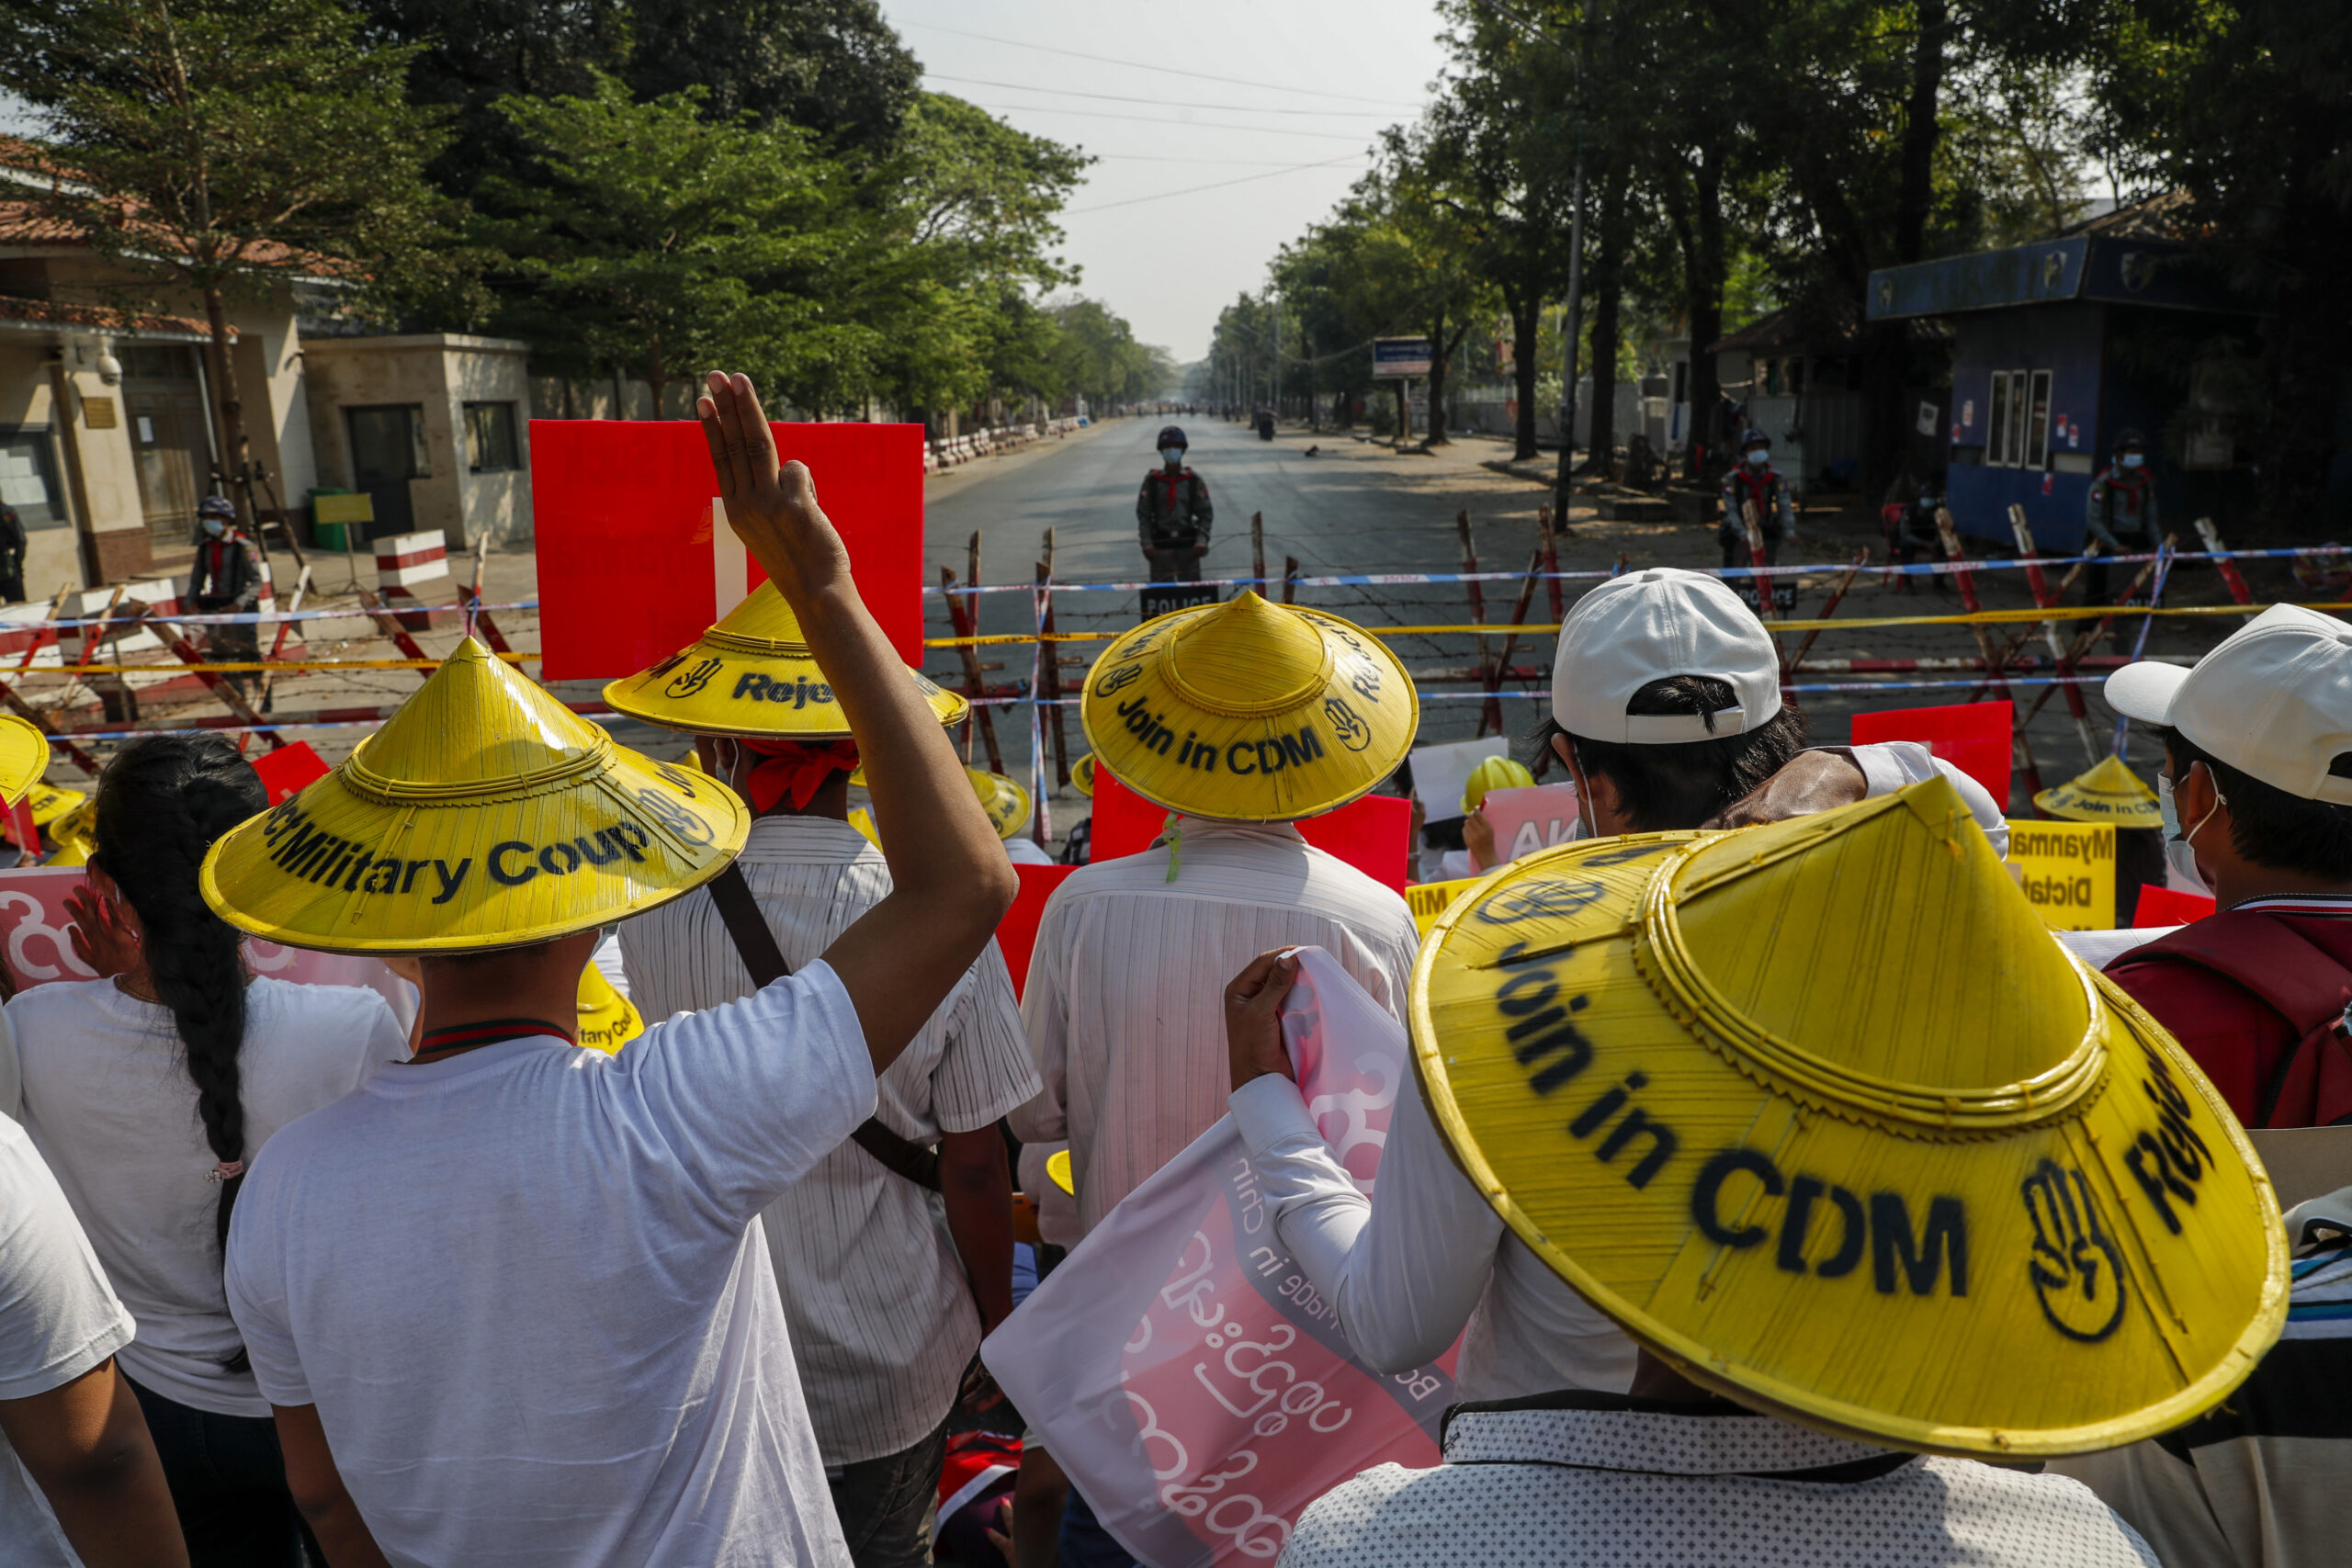 Protestors wear hats in support of the Civil Disobedience Movement shortly after it began in February 2021. (Frontier)